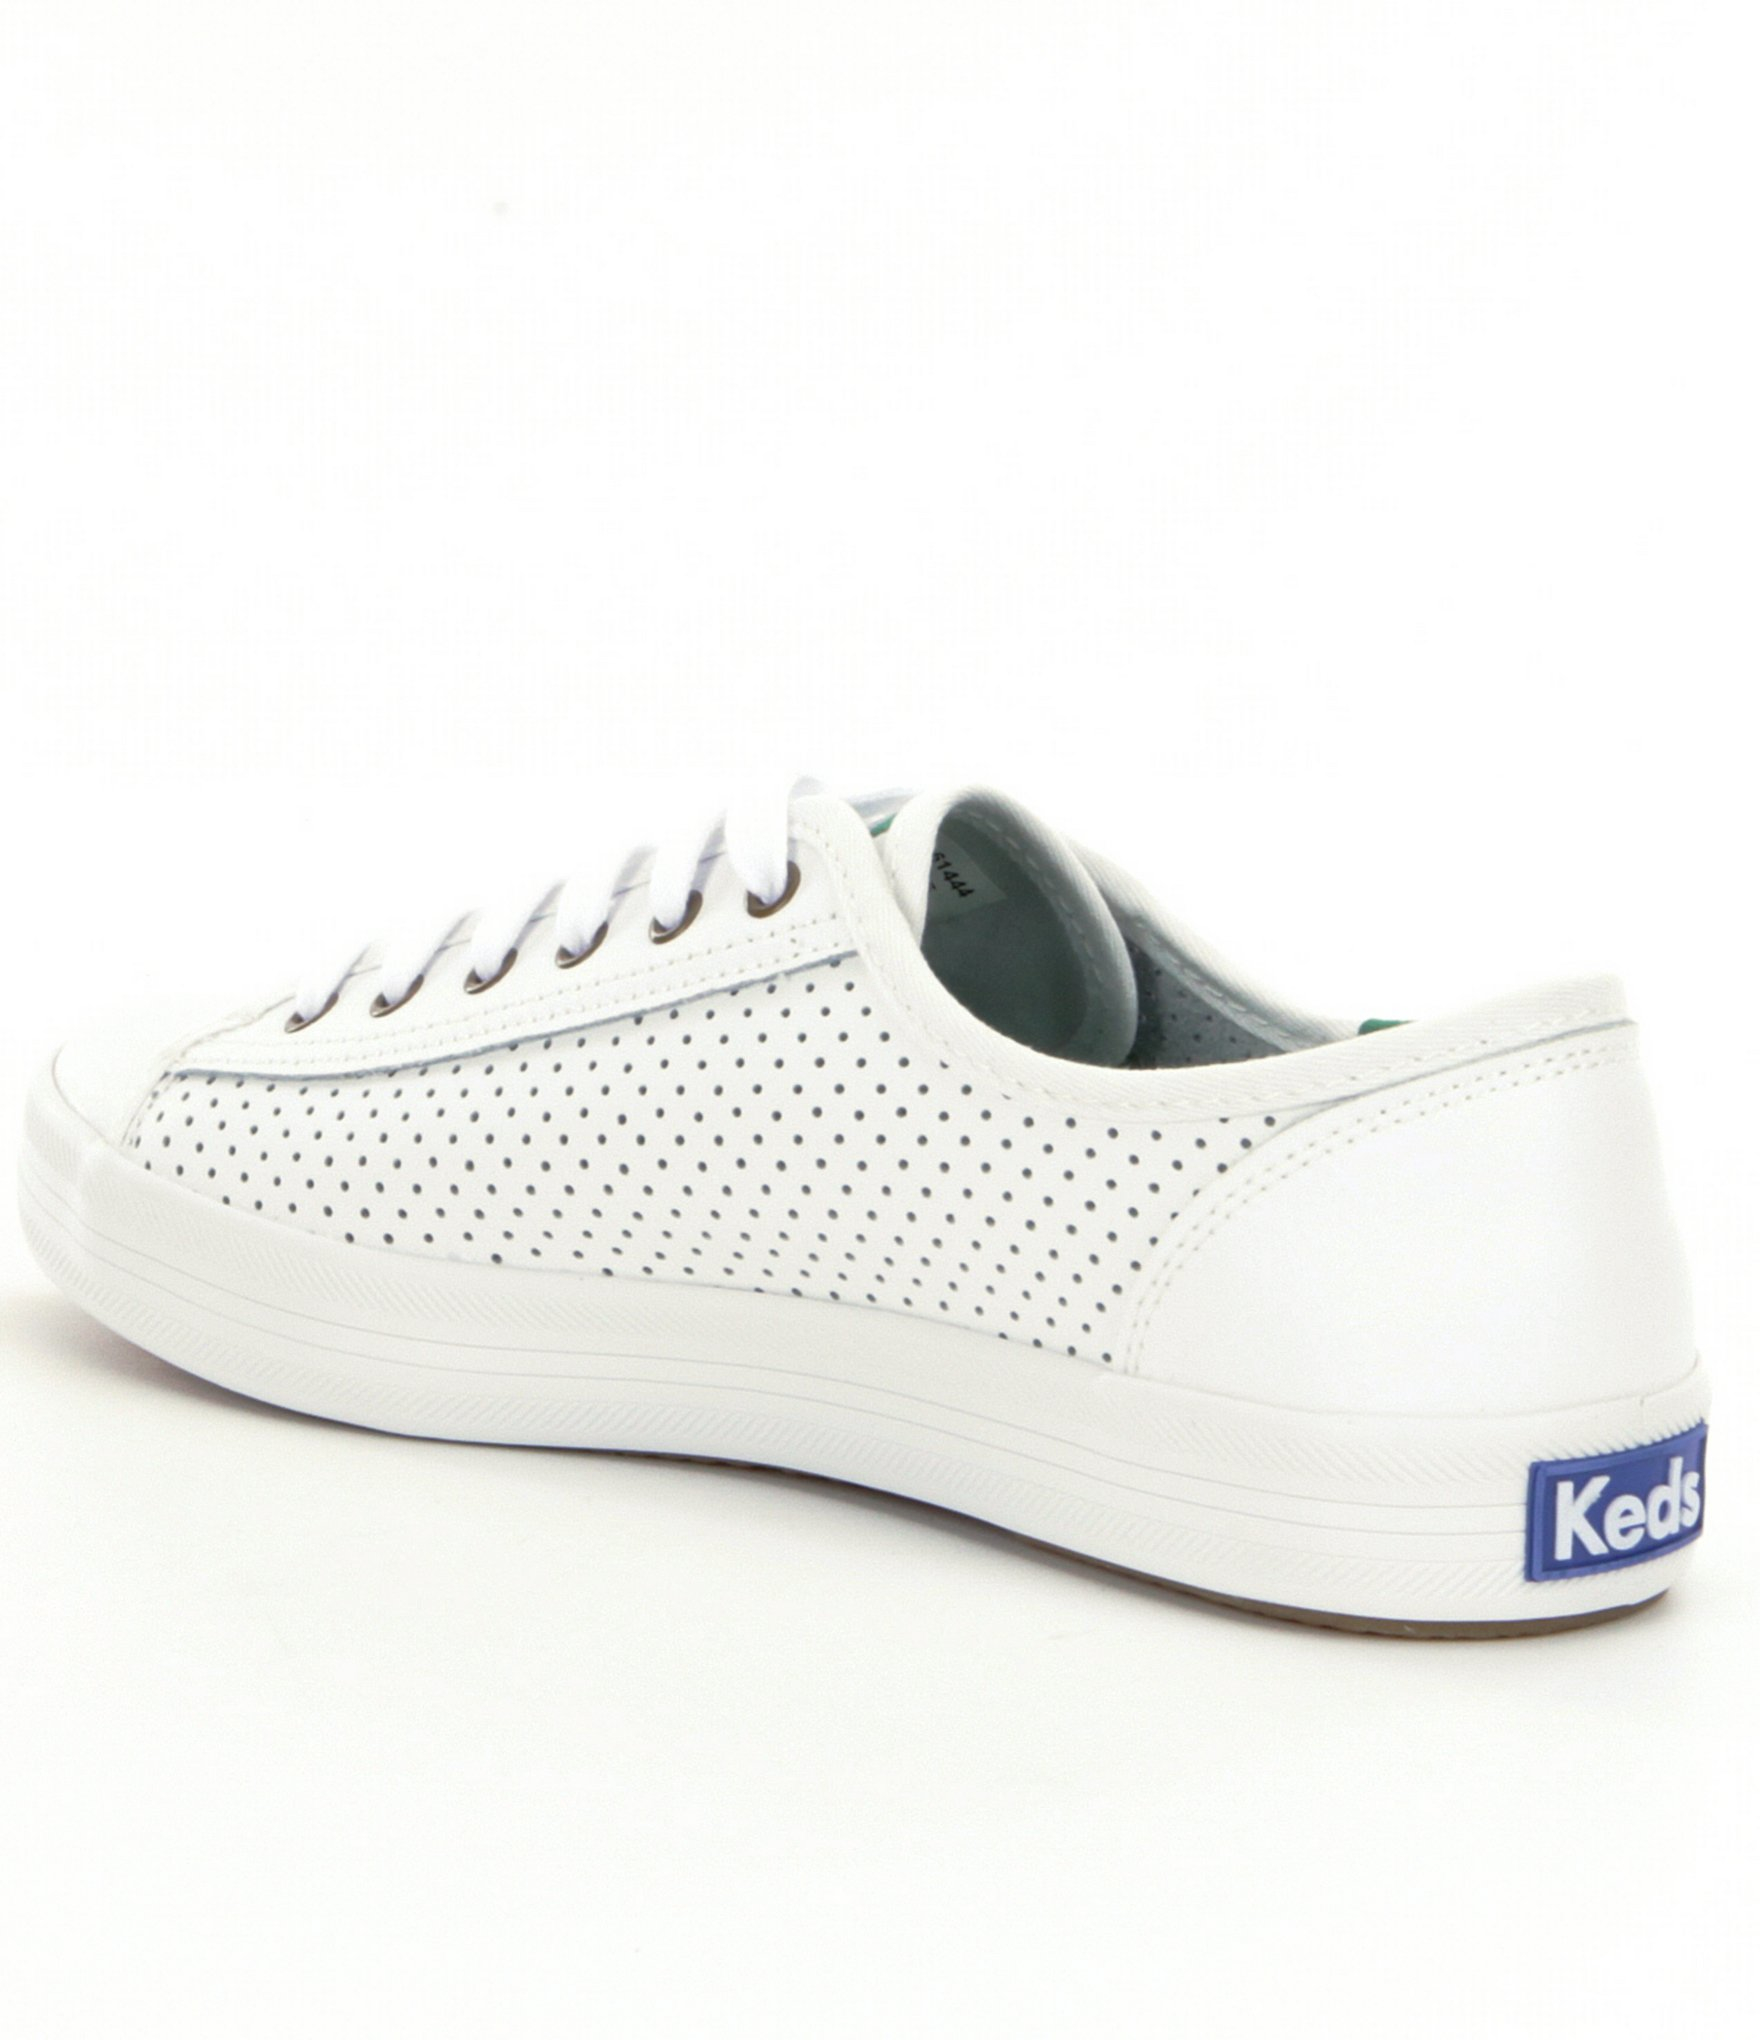 Lyst - Keds Kickstart Perf Leather Sneakers in White